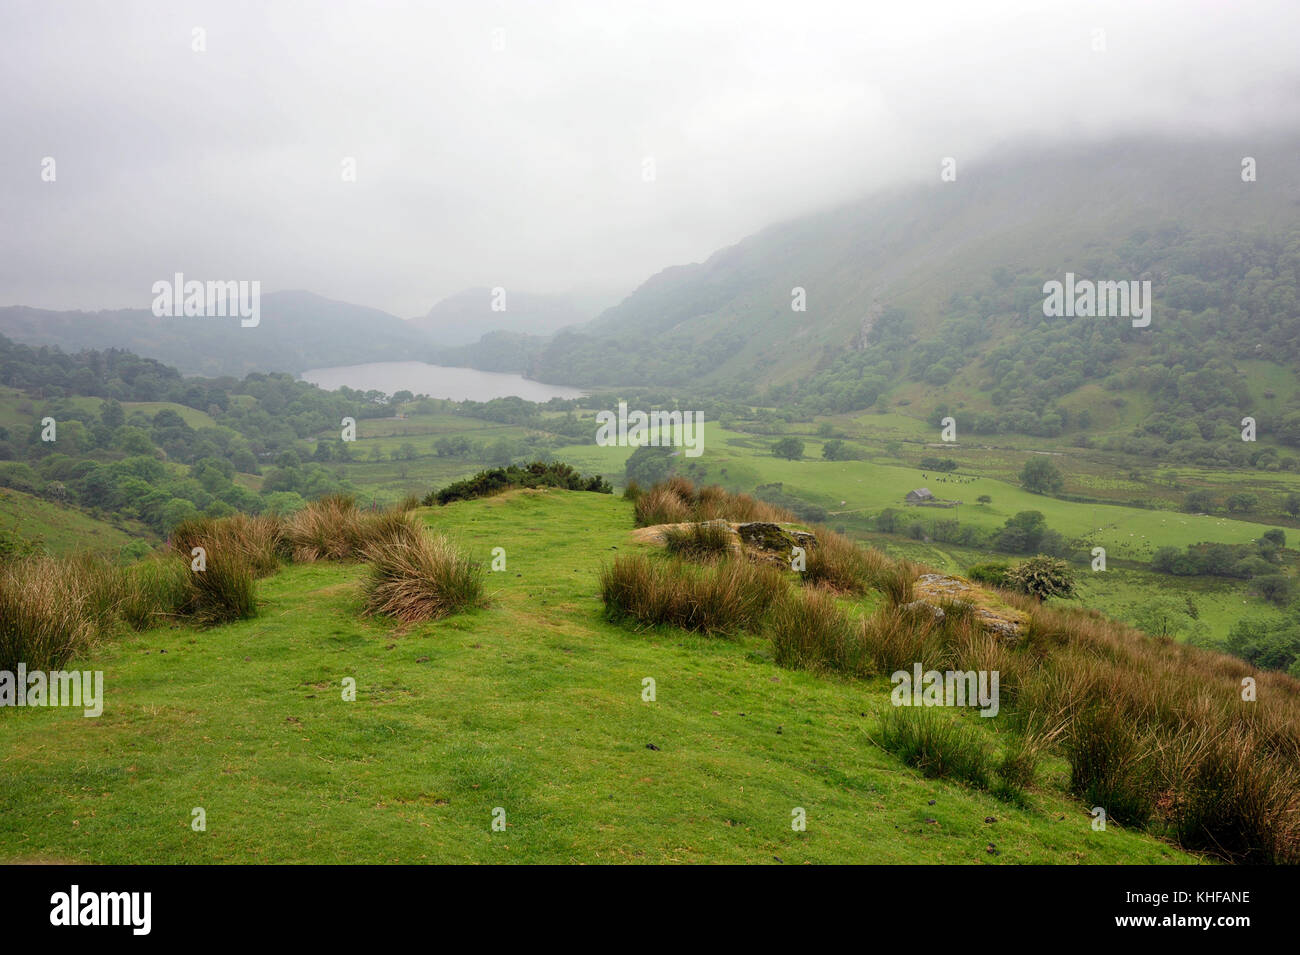 Misty morning looking south along Nant Gwynant Valley with the lake Llyn Gwynant, in the Snowdonia National Park, North Wales, UK. Stock Photo